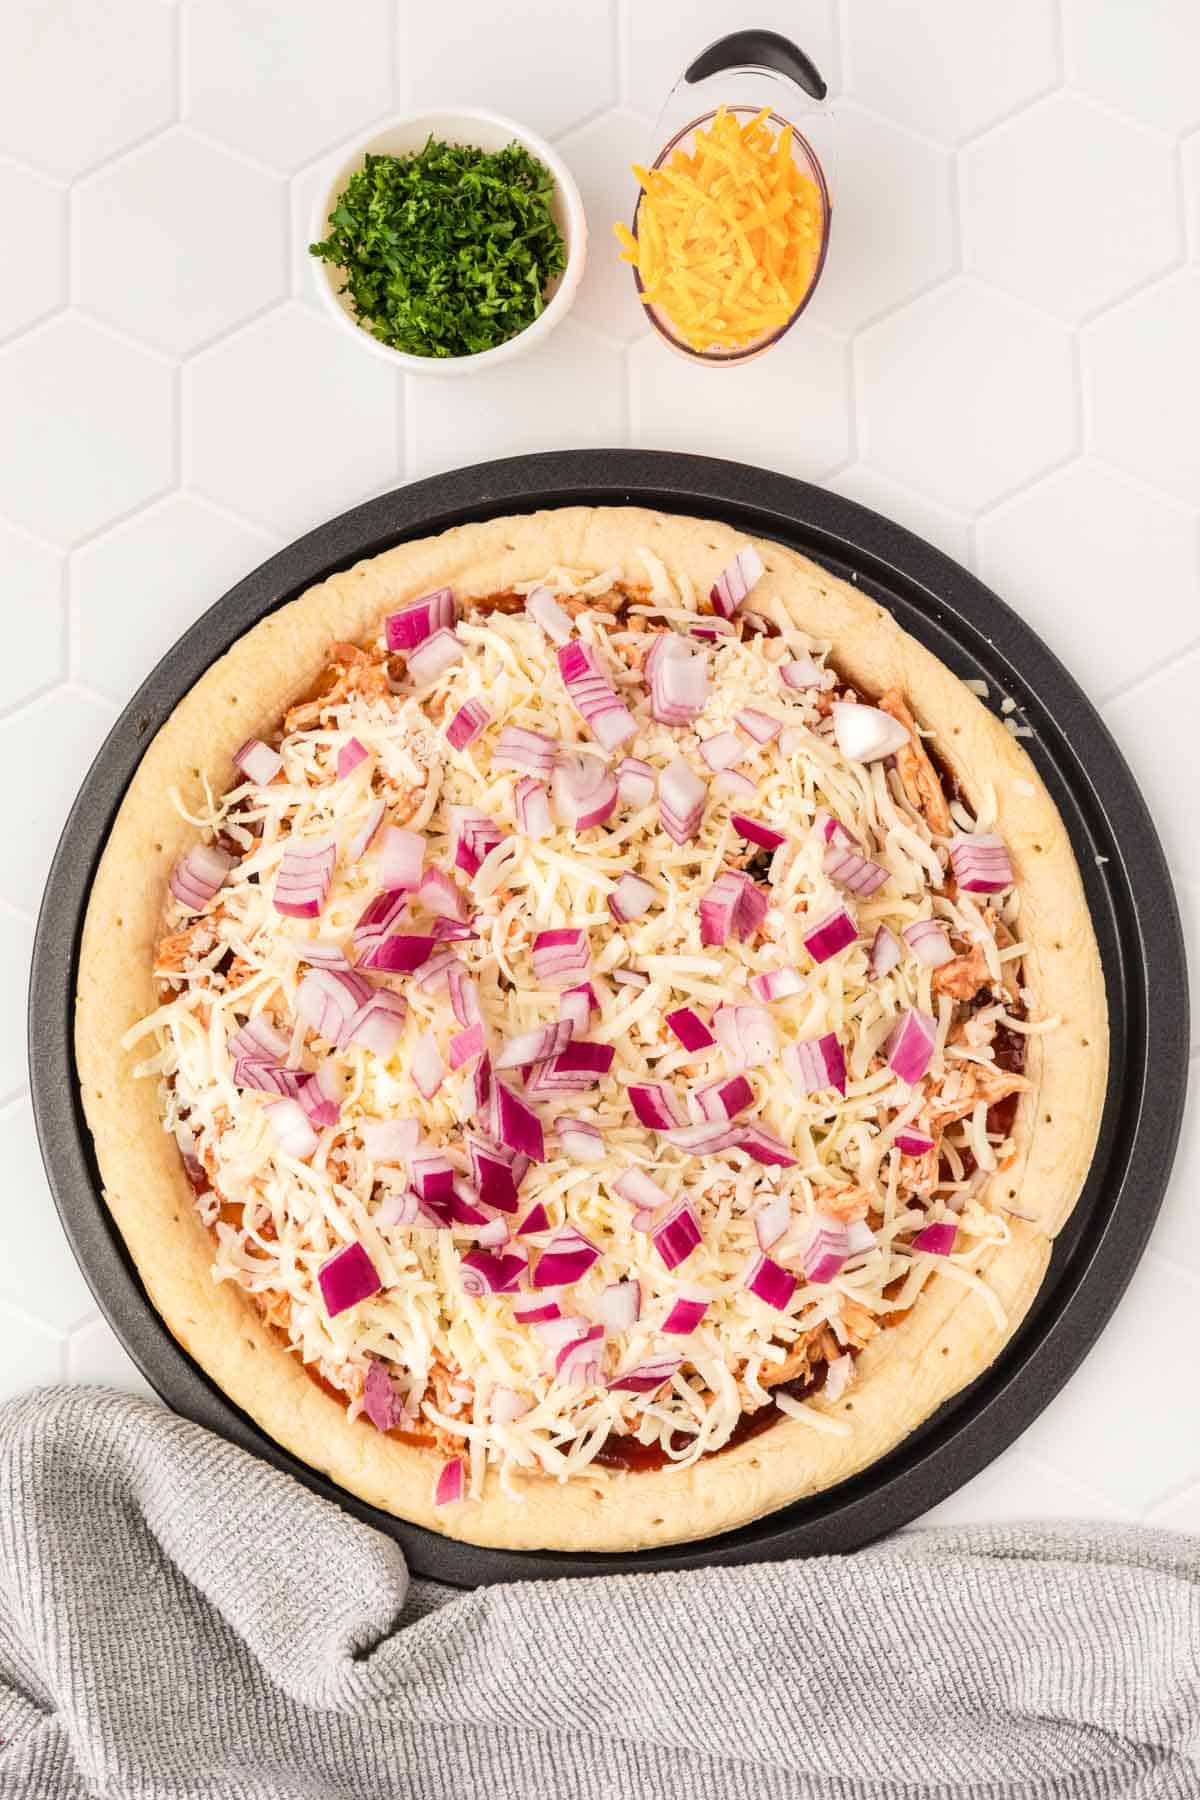 Adding Shredded Cheese and Red Onion to the pizza